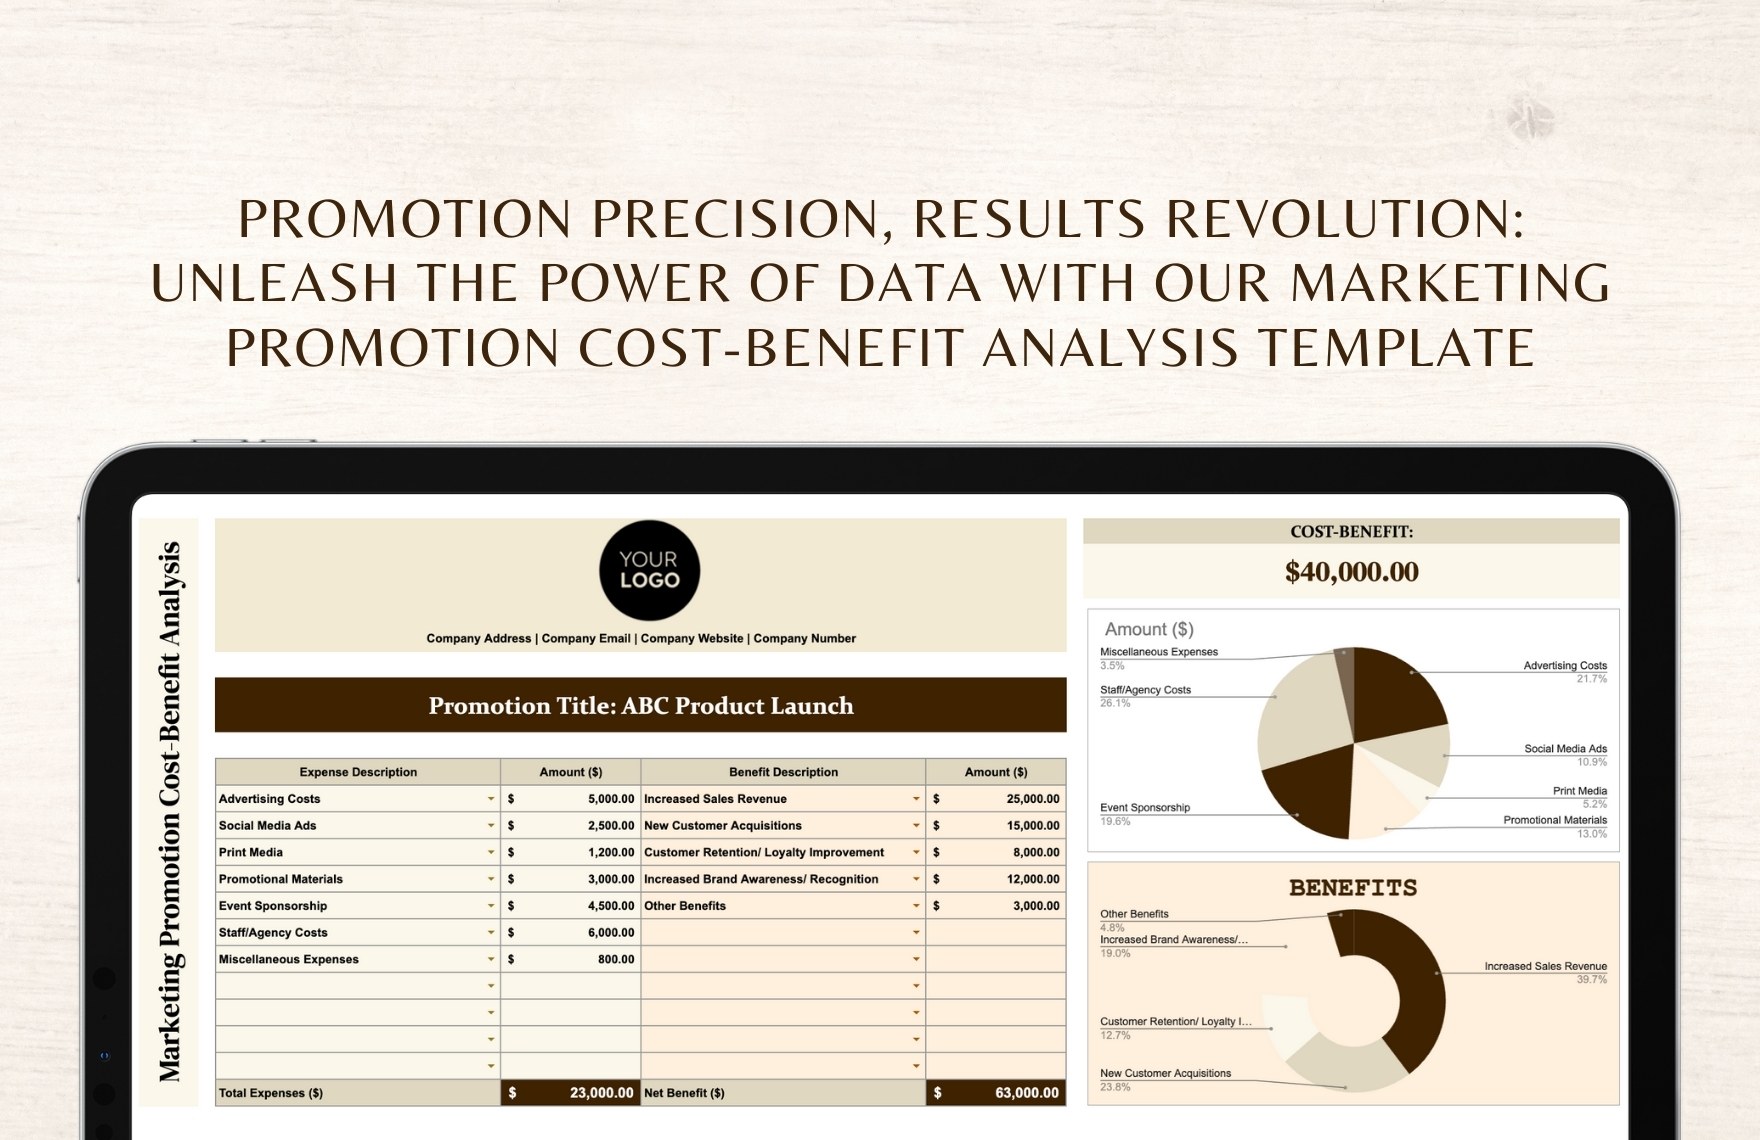 Marketing Promotion Cost-Benefit Analysis Template